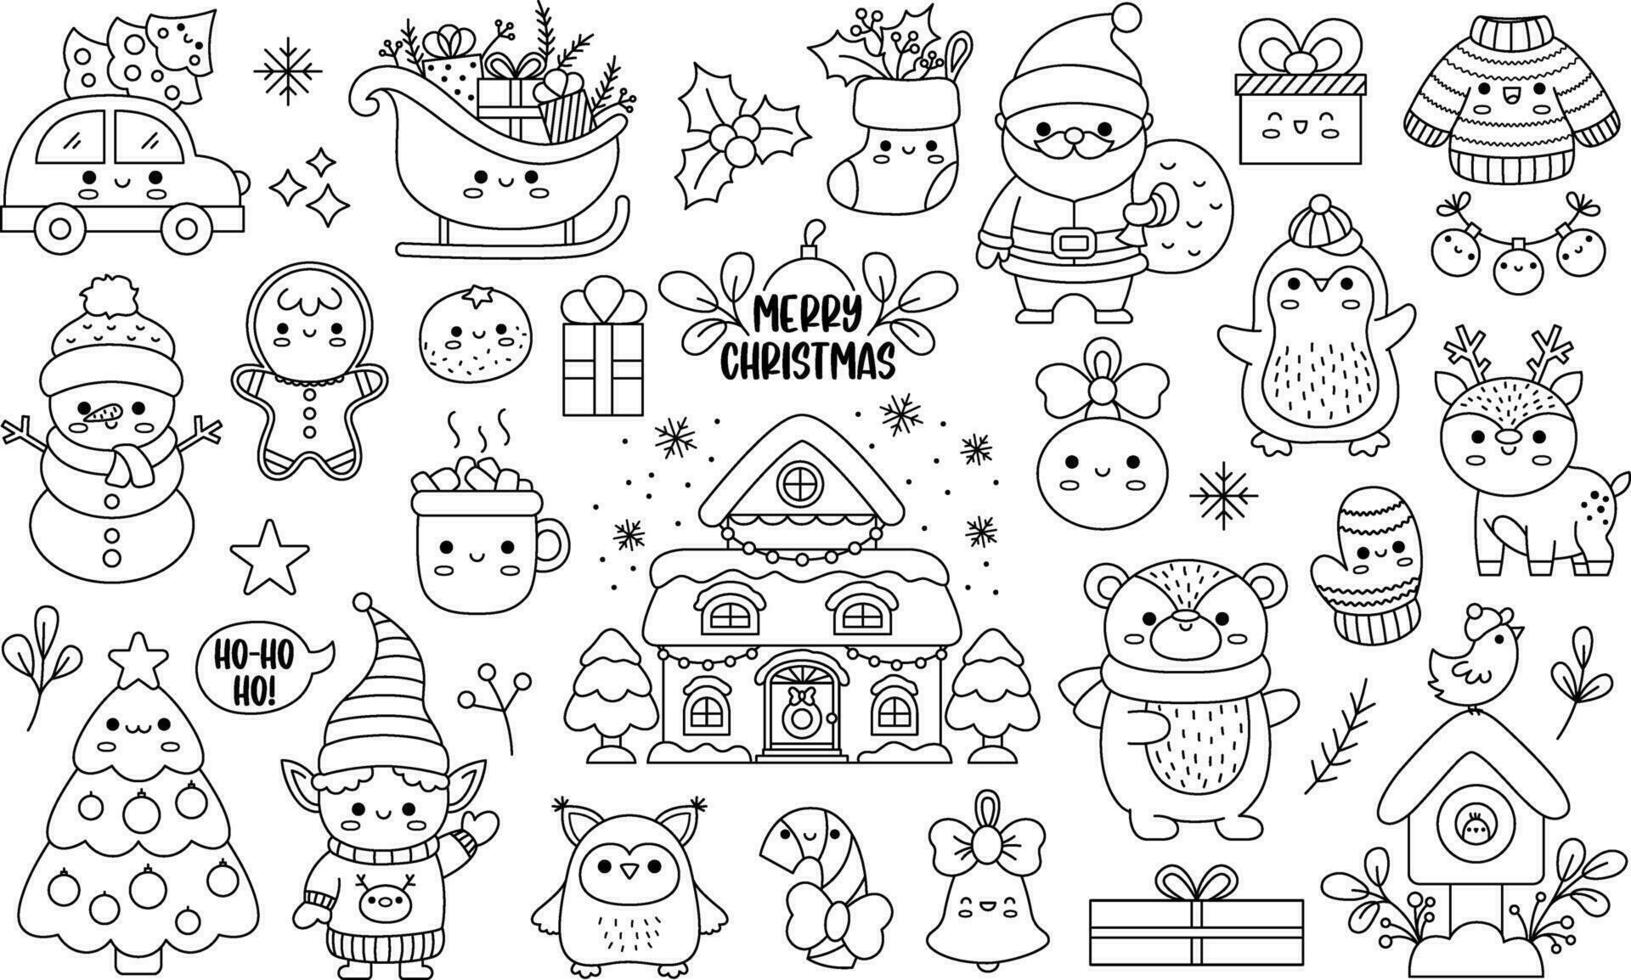 Vector black and white set of Christmas elements with Santa Claus, reindeer, animals, elf, stocking, fir tree, house with ornament. Cute kawaii line illustration for kids.  New year coloring page